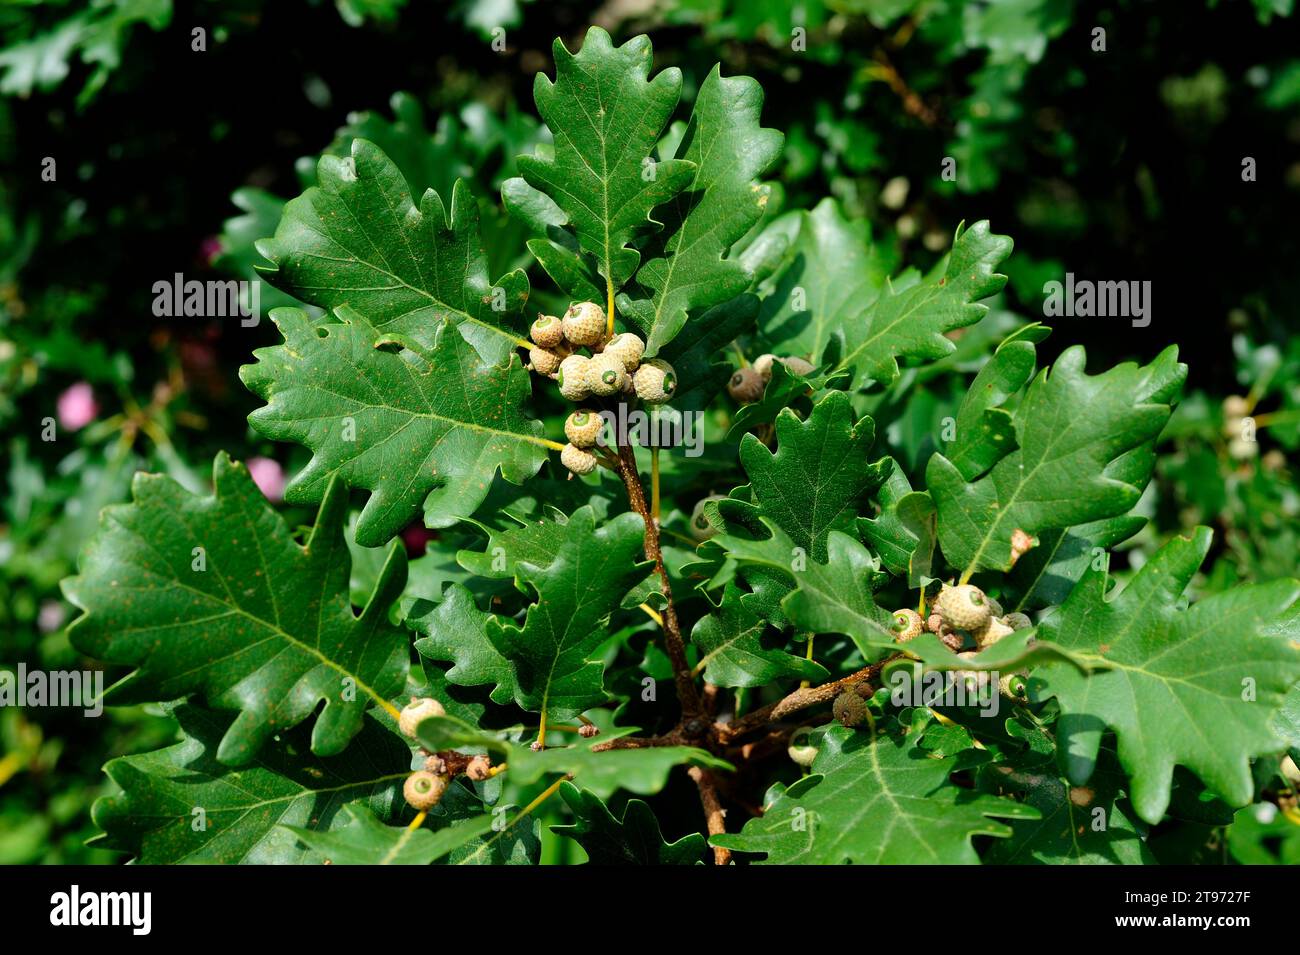 Downy oak or pubescent oak (Quercus pubescens or Quercus humilis) is a deciduous tree native to southern Europe and southwest Asia from Pyrenees to Tu Stock Photo